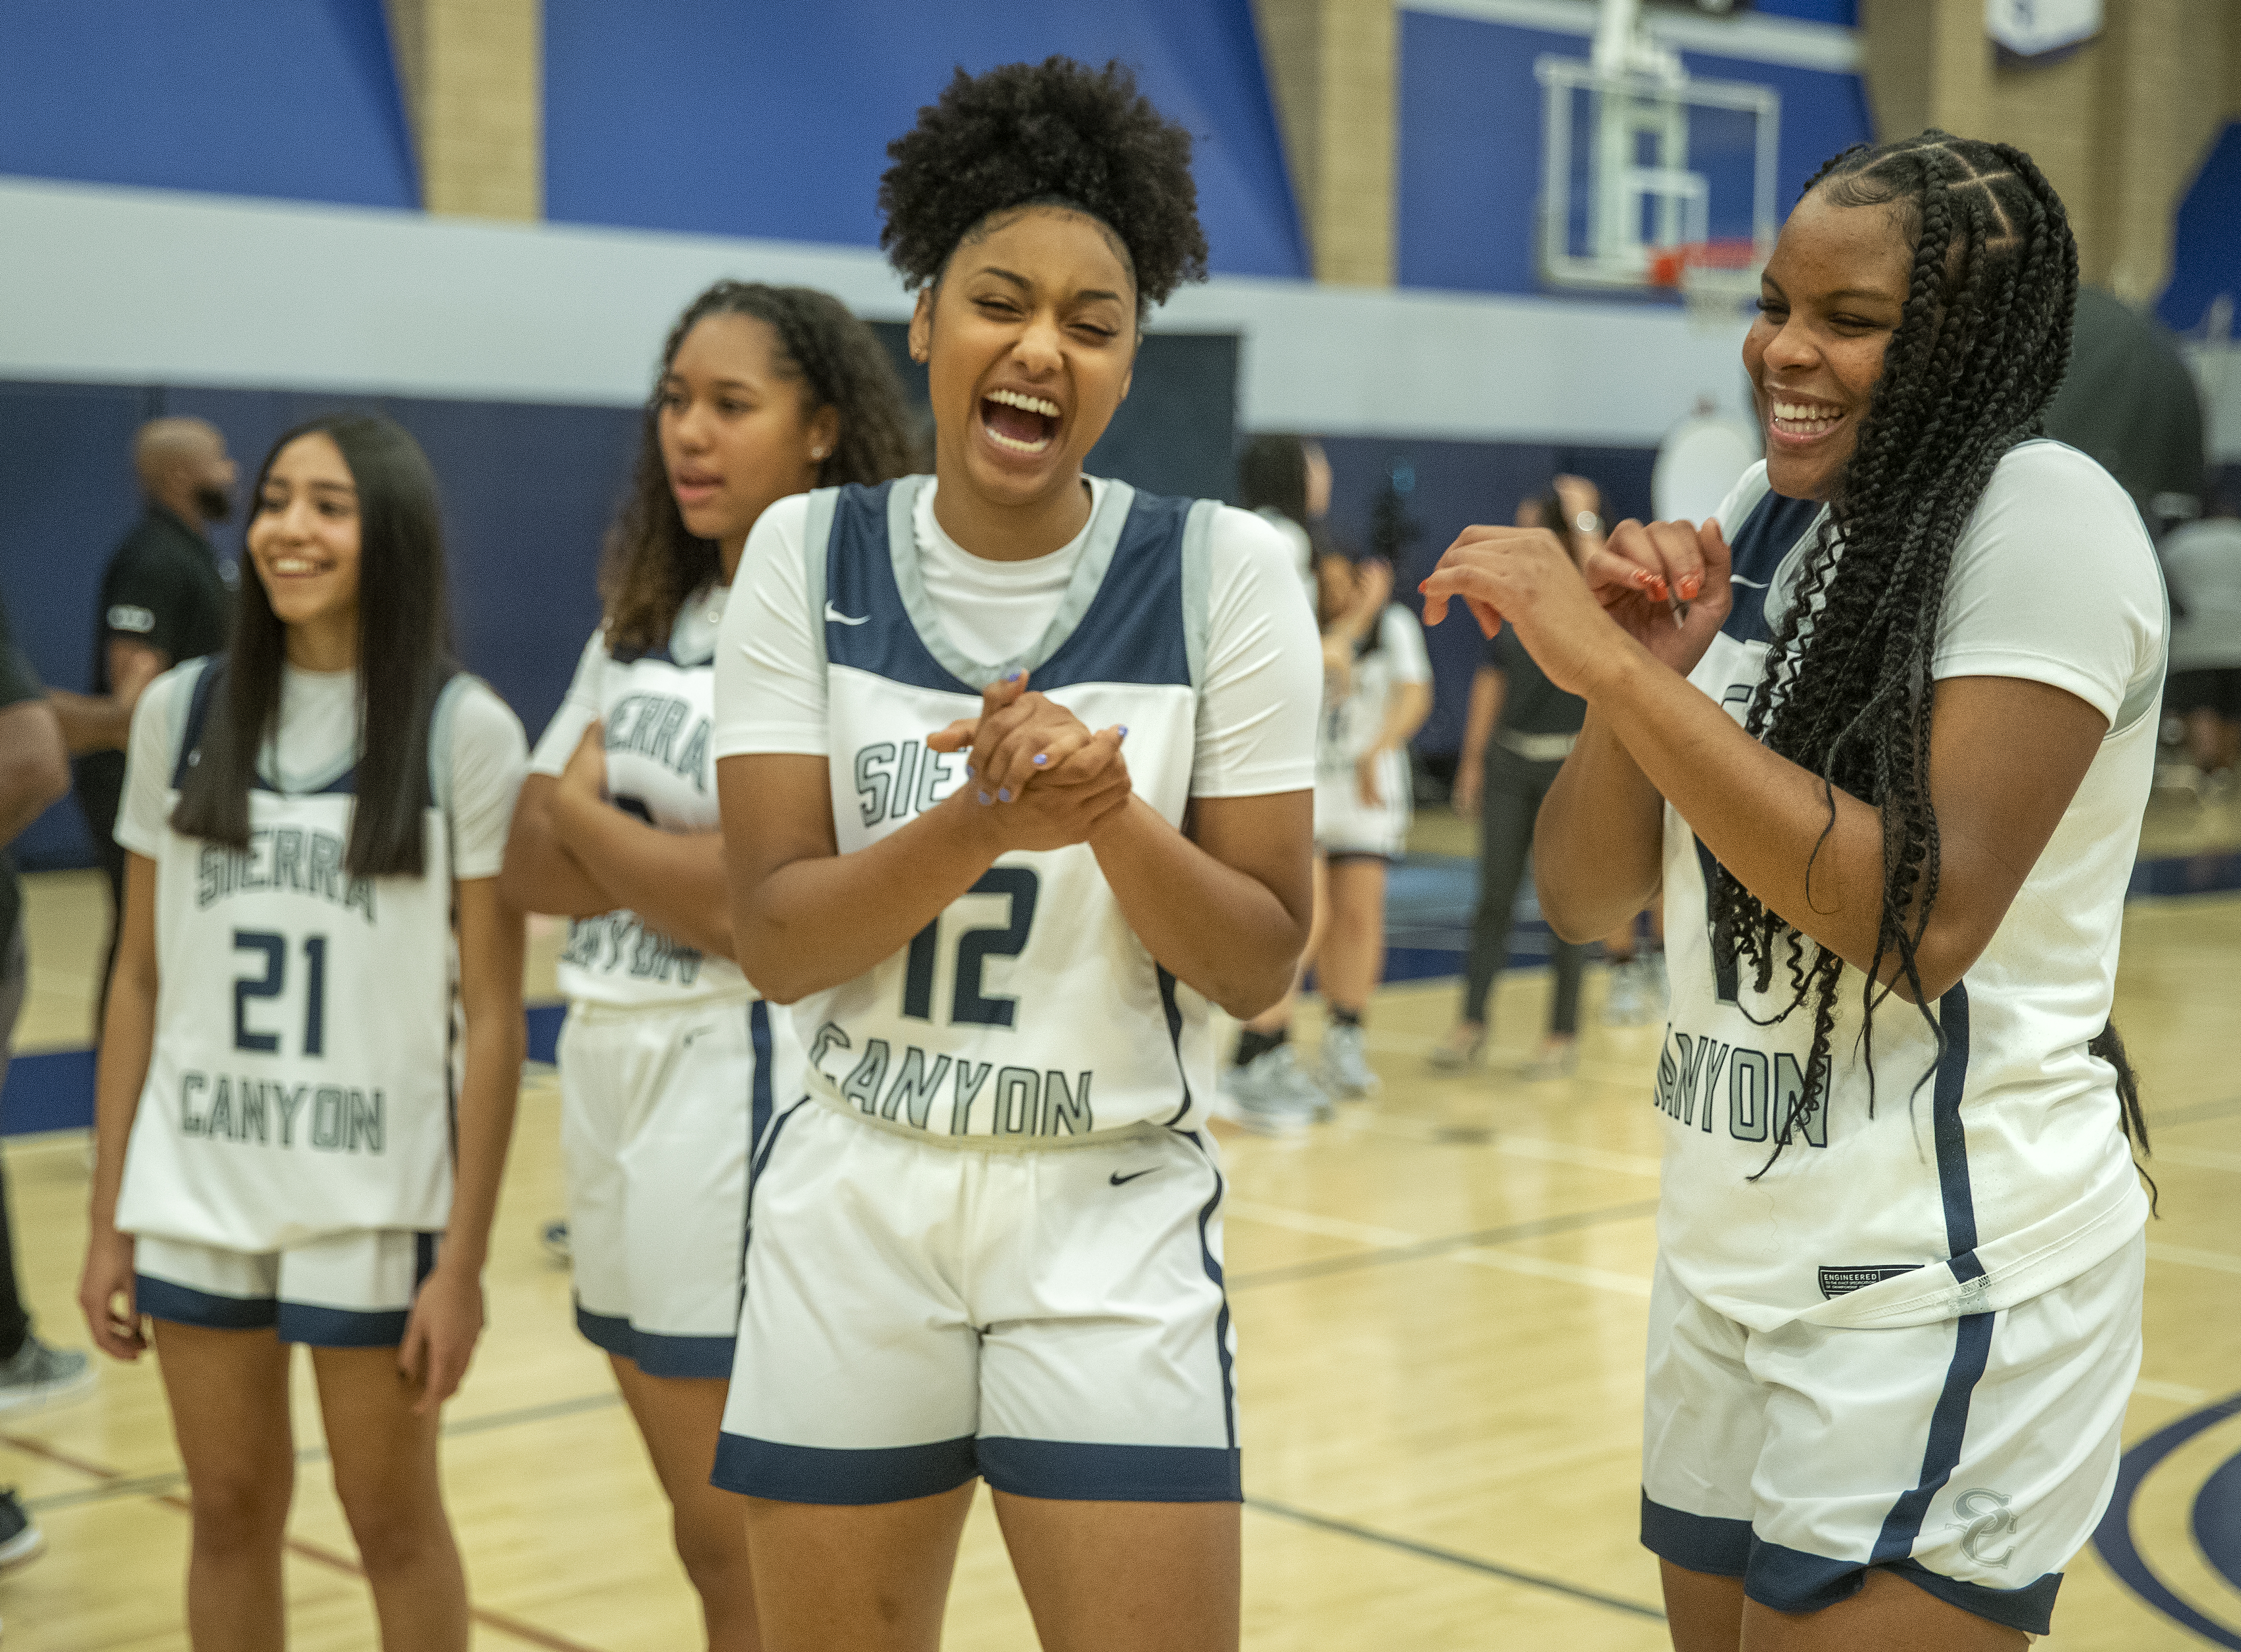 Juju Watkins, foreground, left and Mac Randolph, right, members of the Sierra Canyon girls basketball team, share a light moment together during media day inside the schools gymnasium.